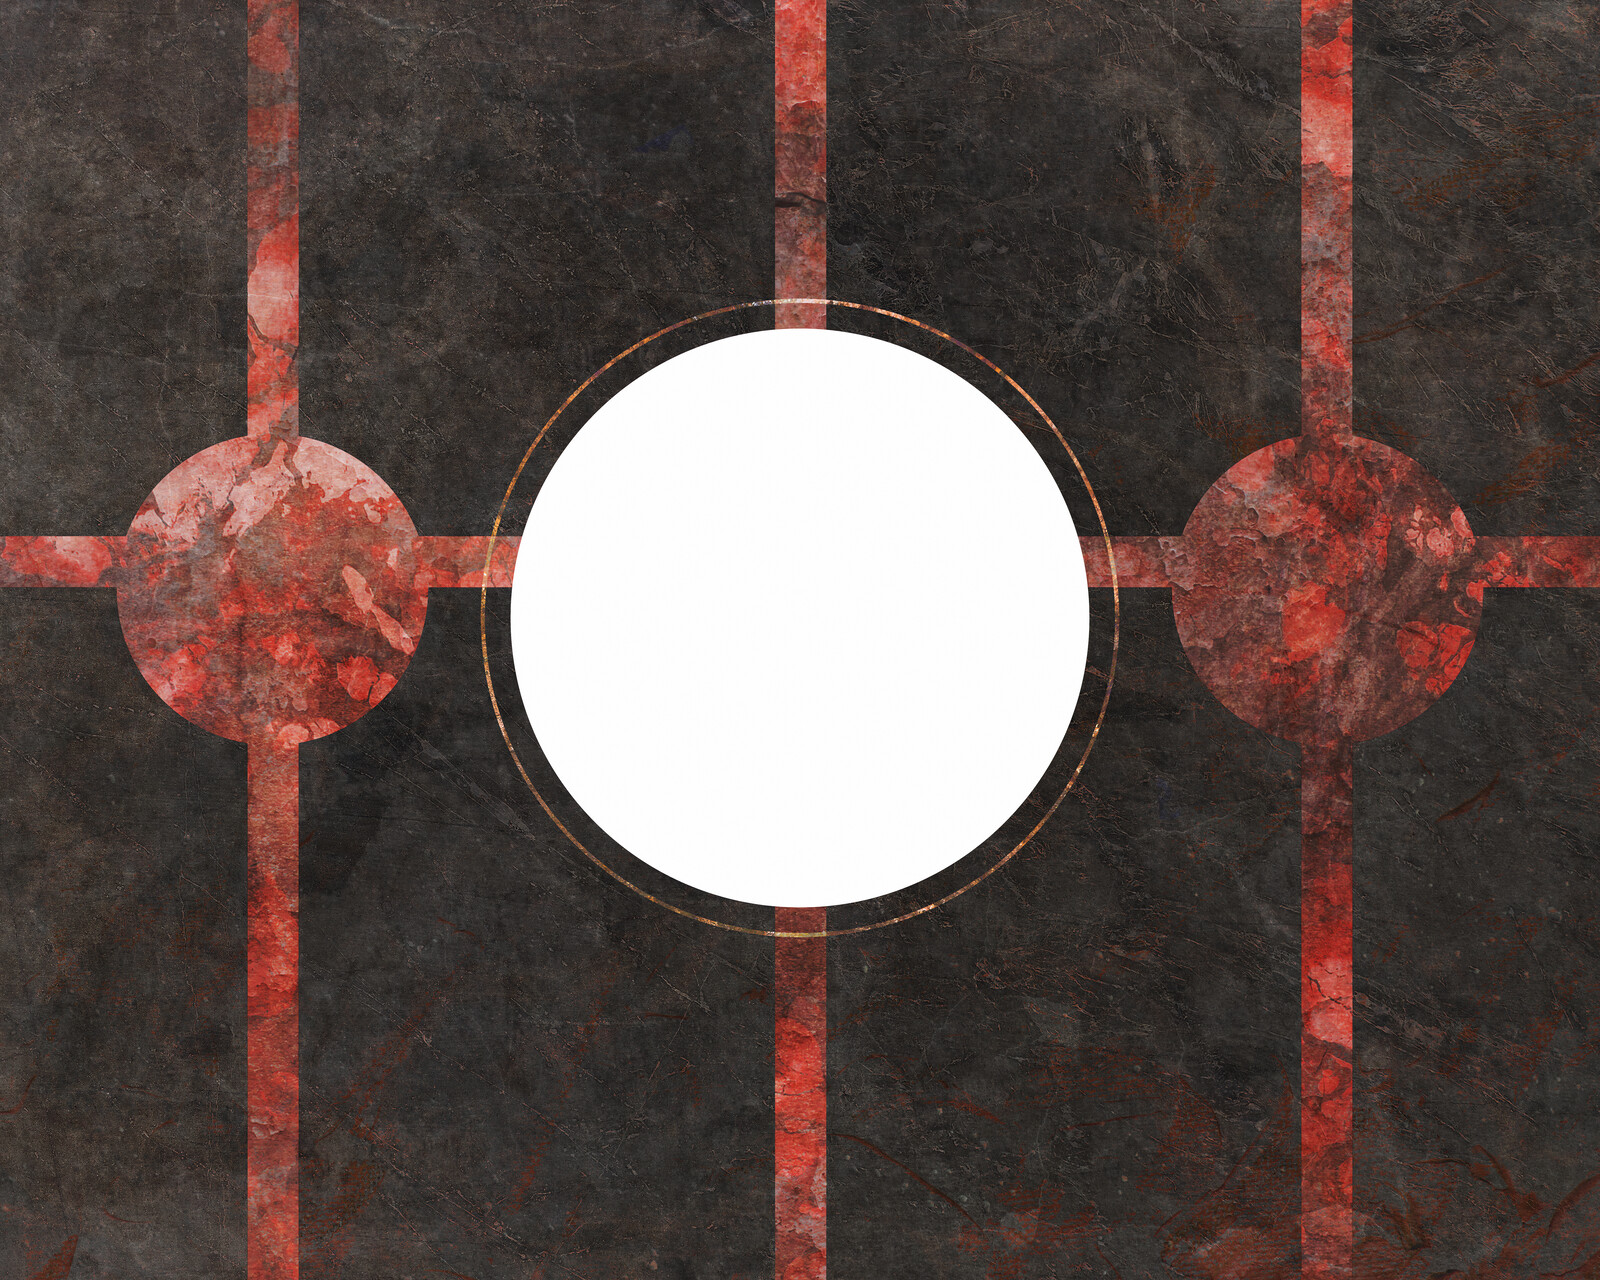 A large white circle at center with two flanking red circles, with a horizontal red line underneath going across the canvas and three vertical red lines behind the three circles.